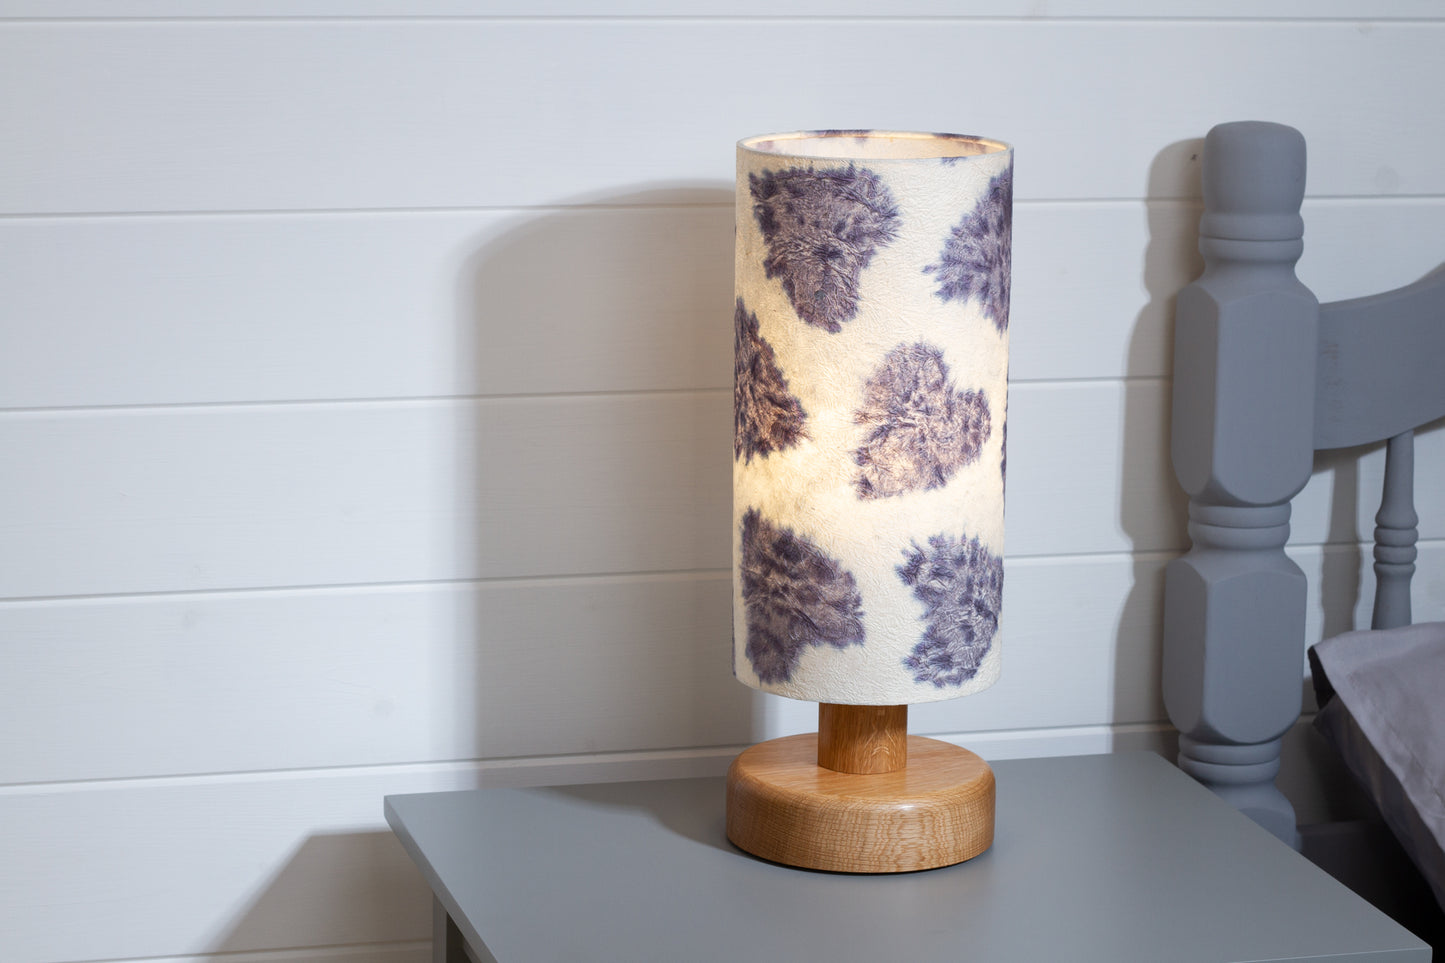 Round Oak Table Lamp (15cm) with 15cm x 30cm Drum Lampshade in B130 ~ Soft Hearts Lavender